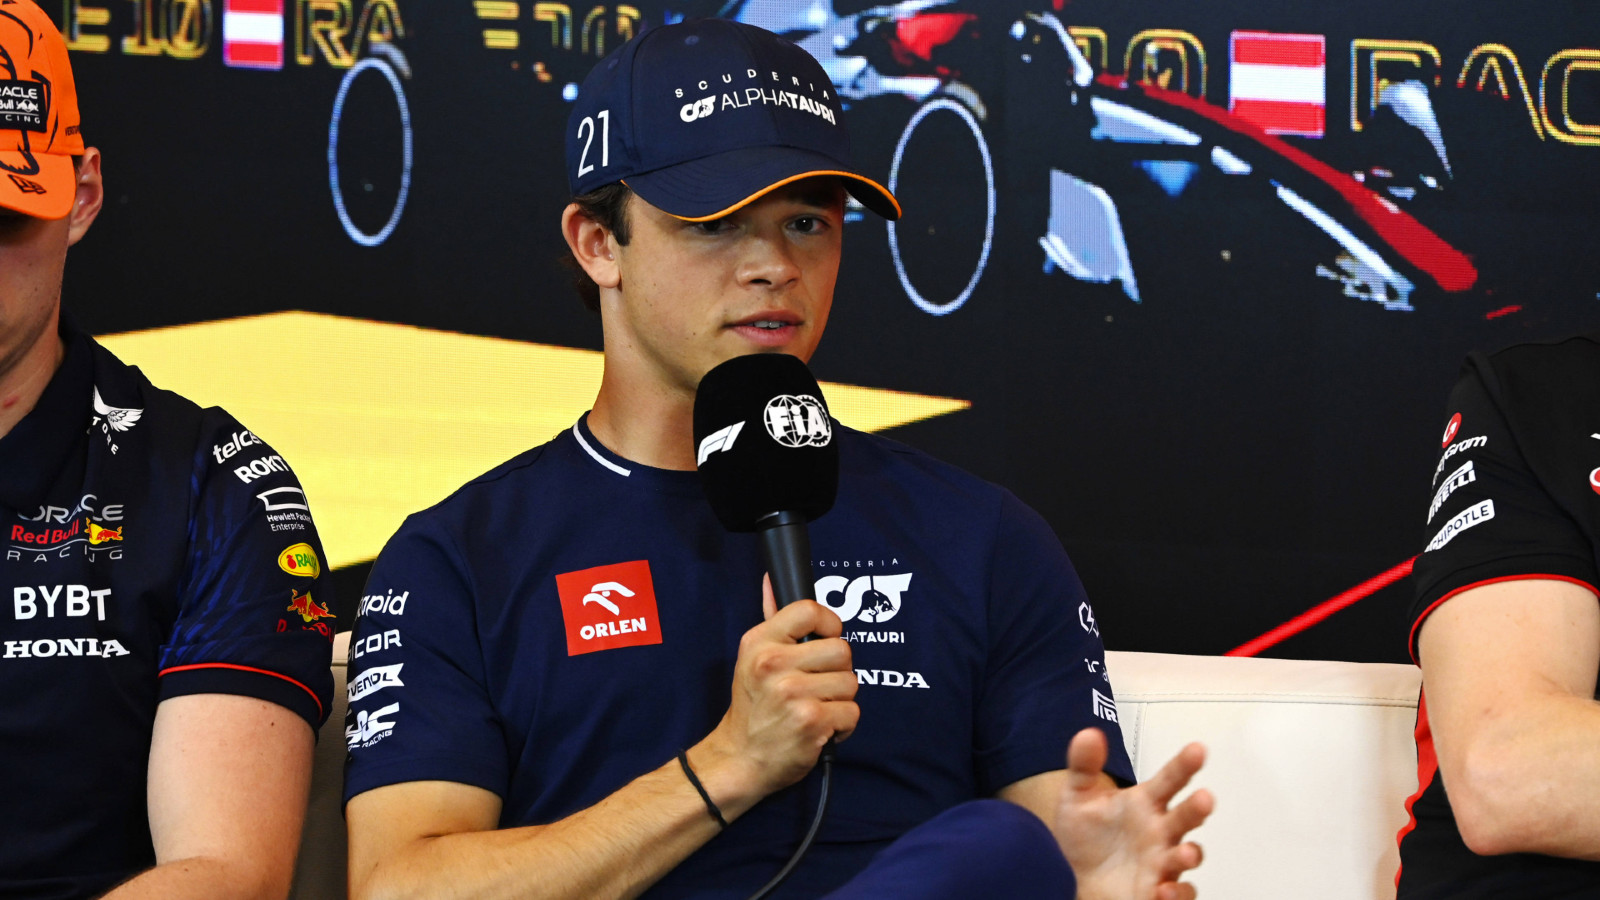 AlphaTauri's Nyck de Vries speaking in the press conference at the Austrian Grand Prix. Spielberg, June 2023.